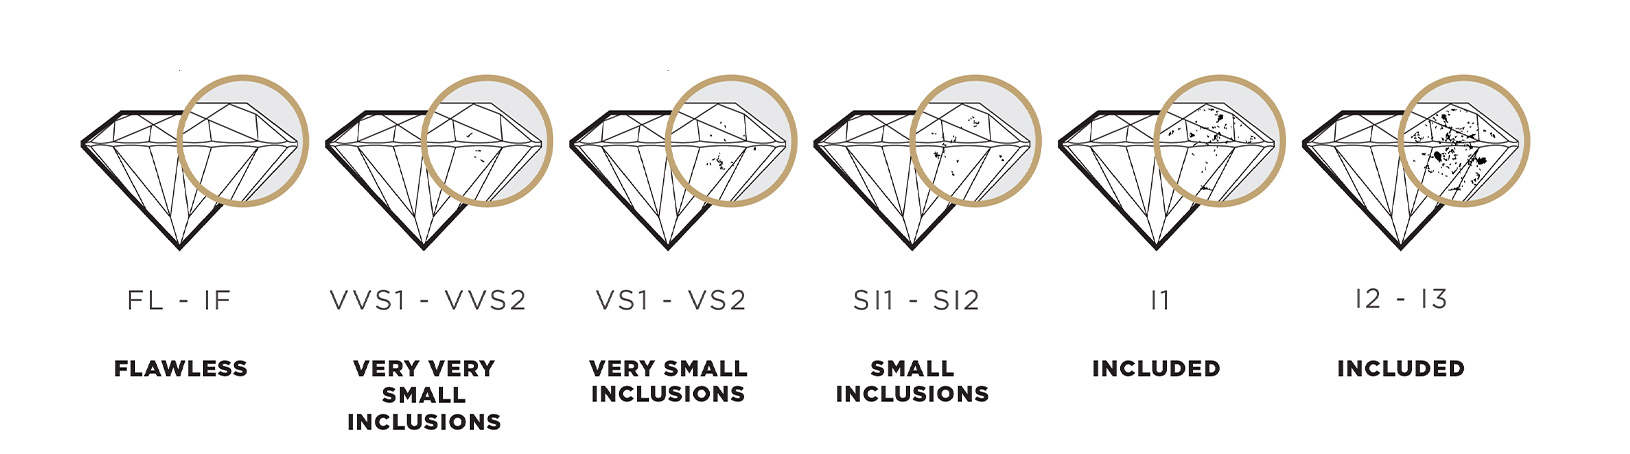 An image of the Diamond Clarity Scale